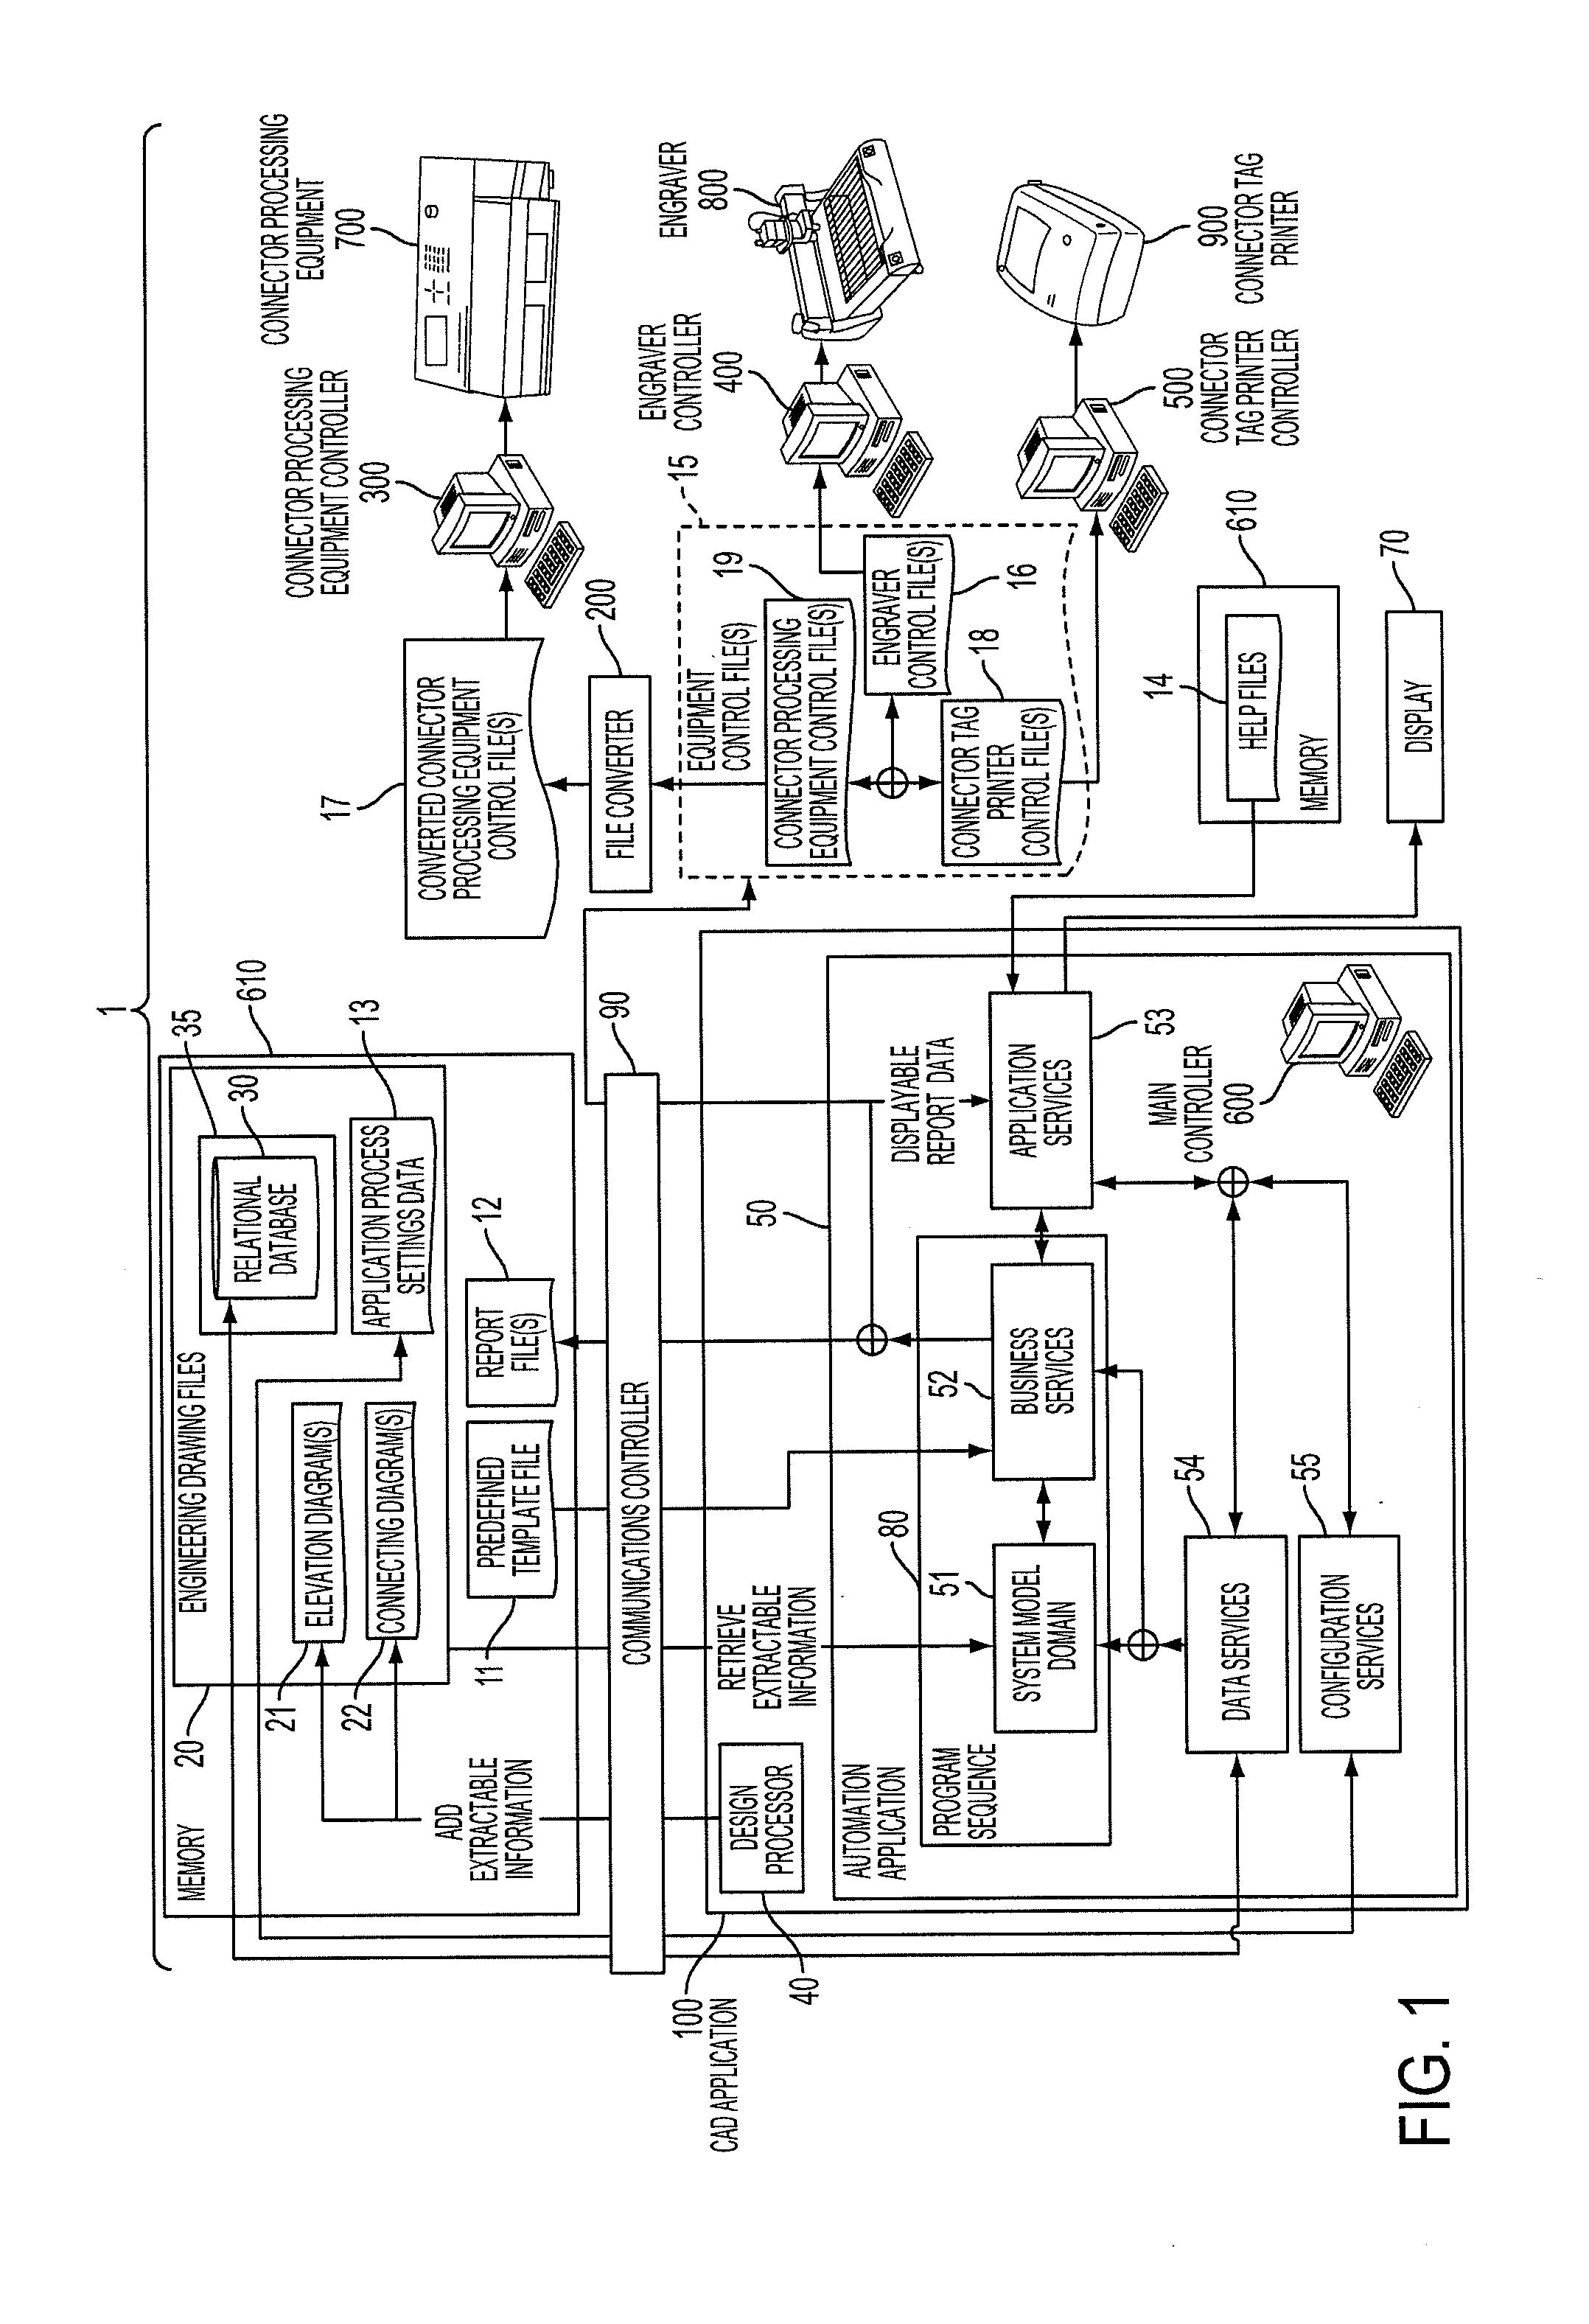 Method and automation system for processing information extractable from an engineering drawing file using information modeling and correlations to generate output data